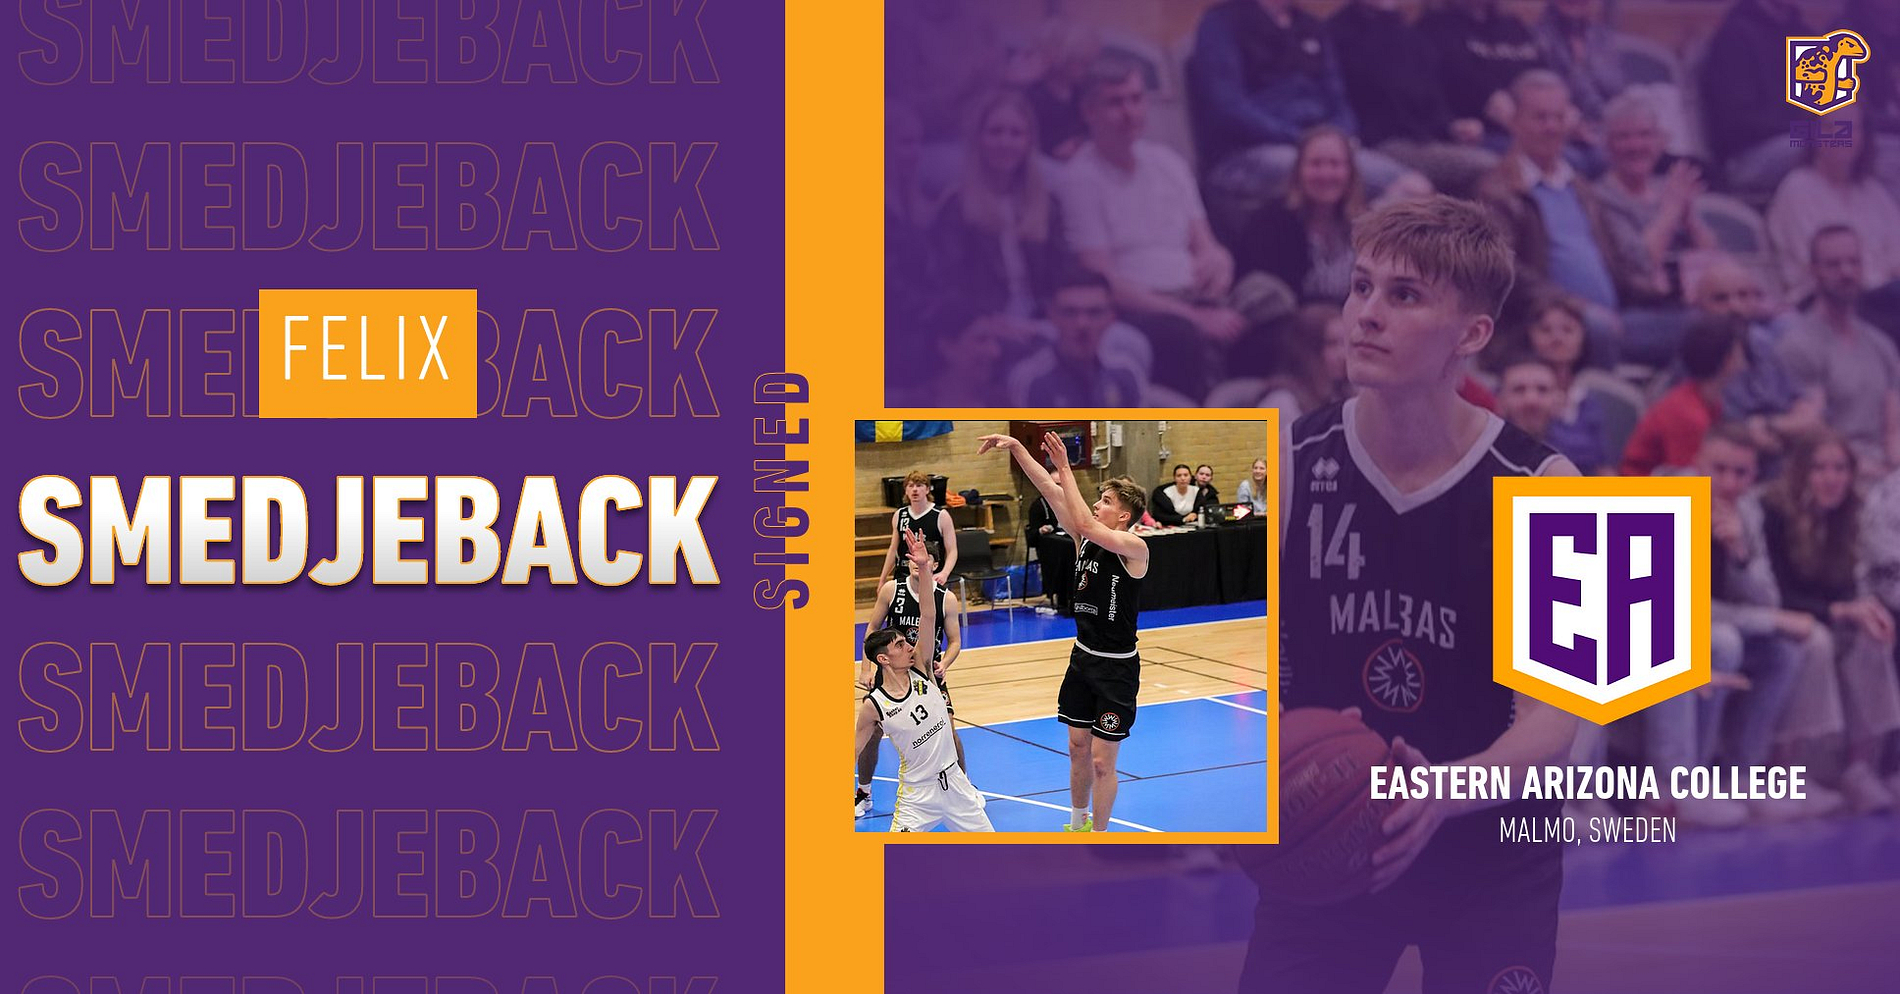 Felix Smedjeback Signs with EAC